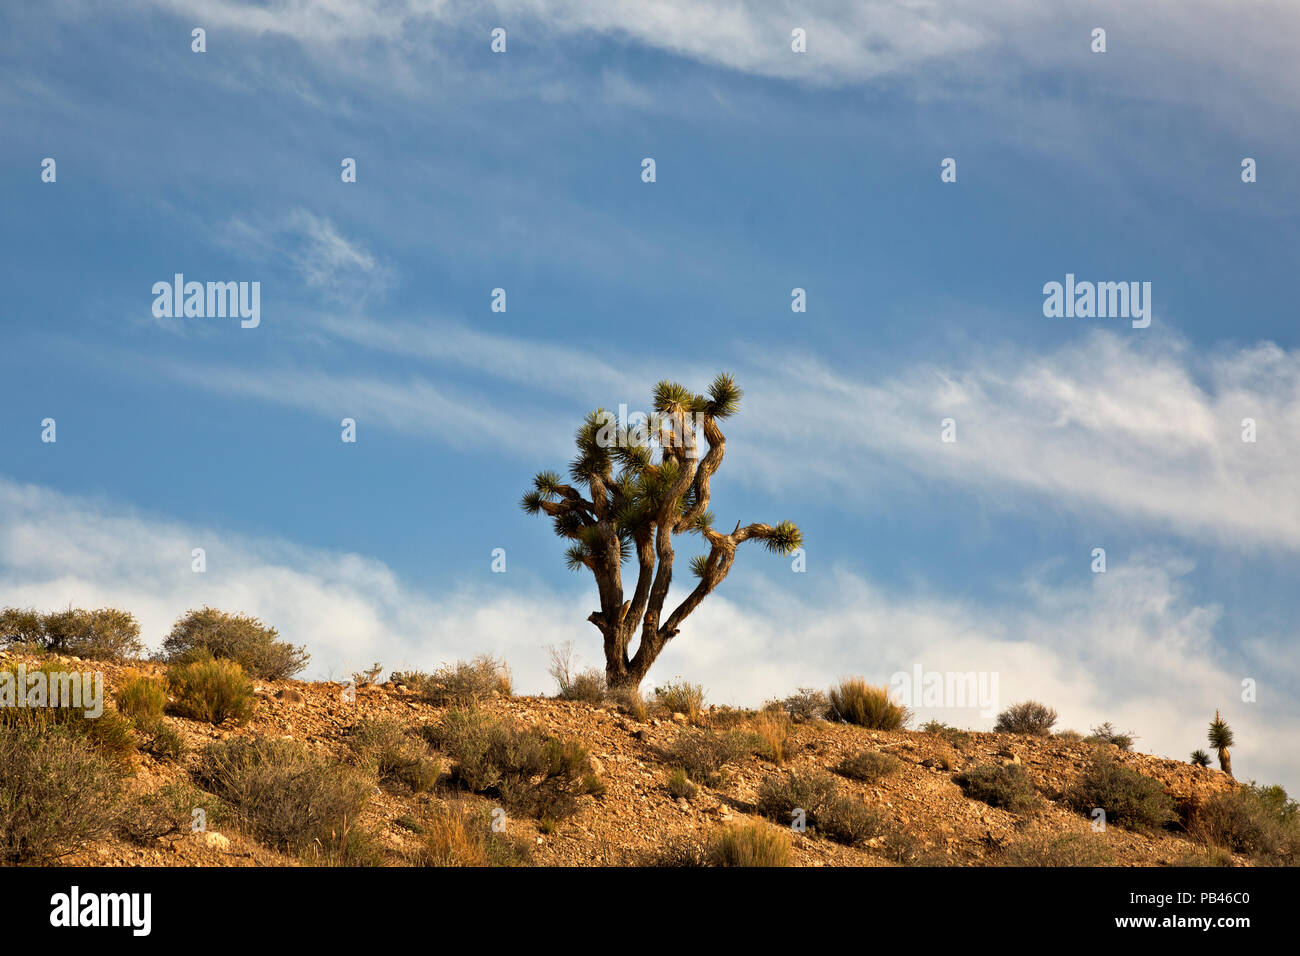 UT00486-00...UTAH - A Joshua tree in the  Woodbury Desert Study Area, part of the Beaver Dam Wash National Conservation Area on the edge of the Mojave Stock Photo